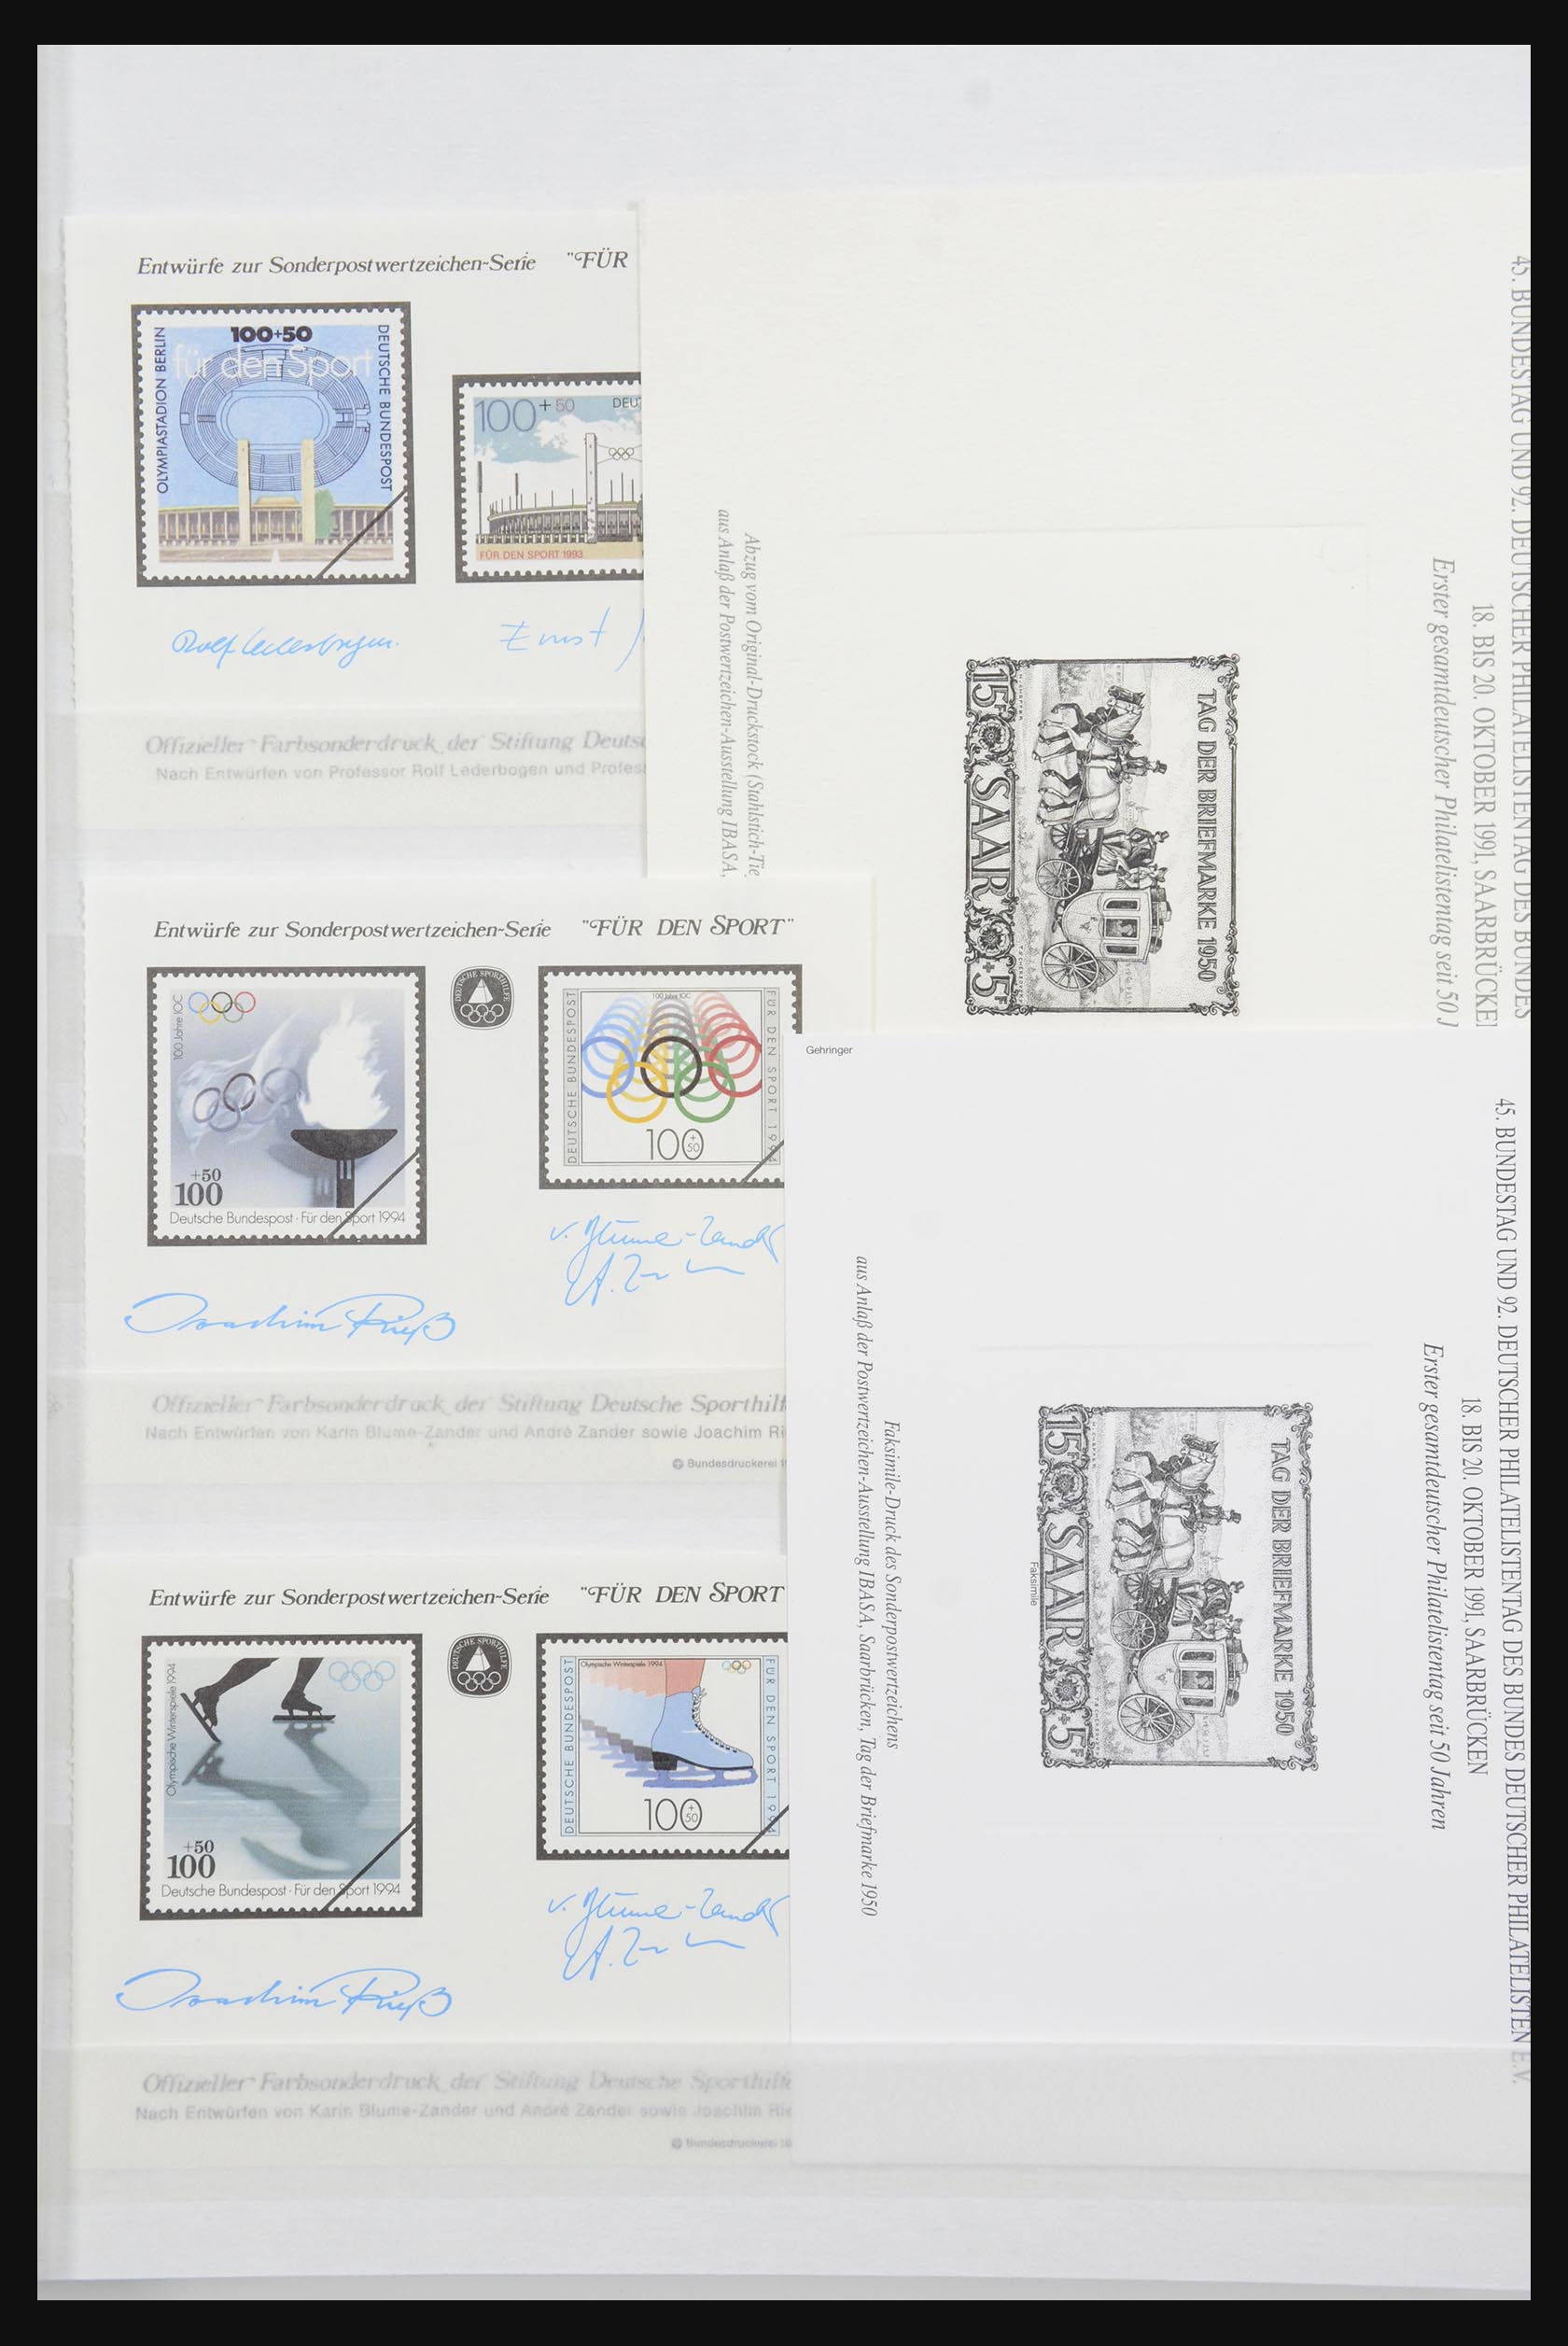 32050 001 - 32050 Bundespost special sheets 1980-2010.